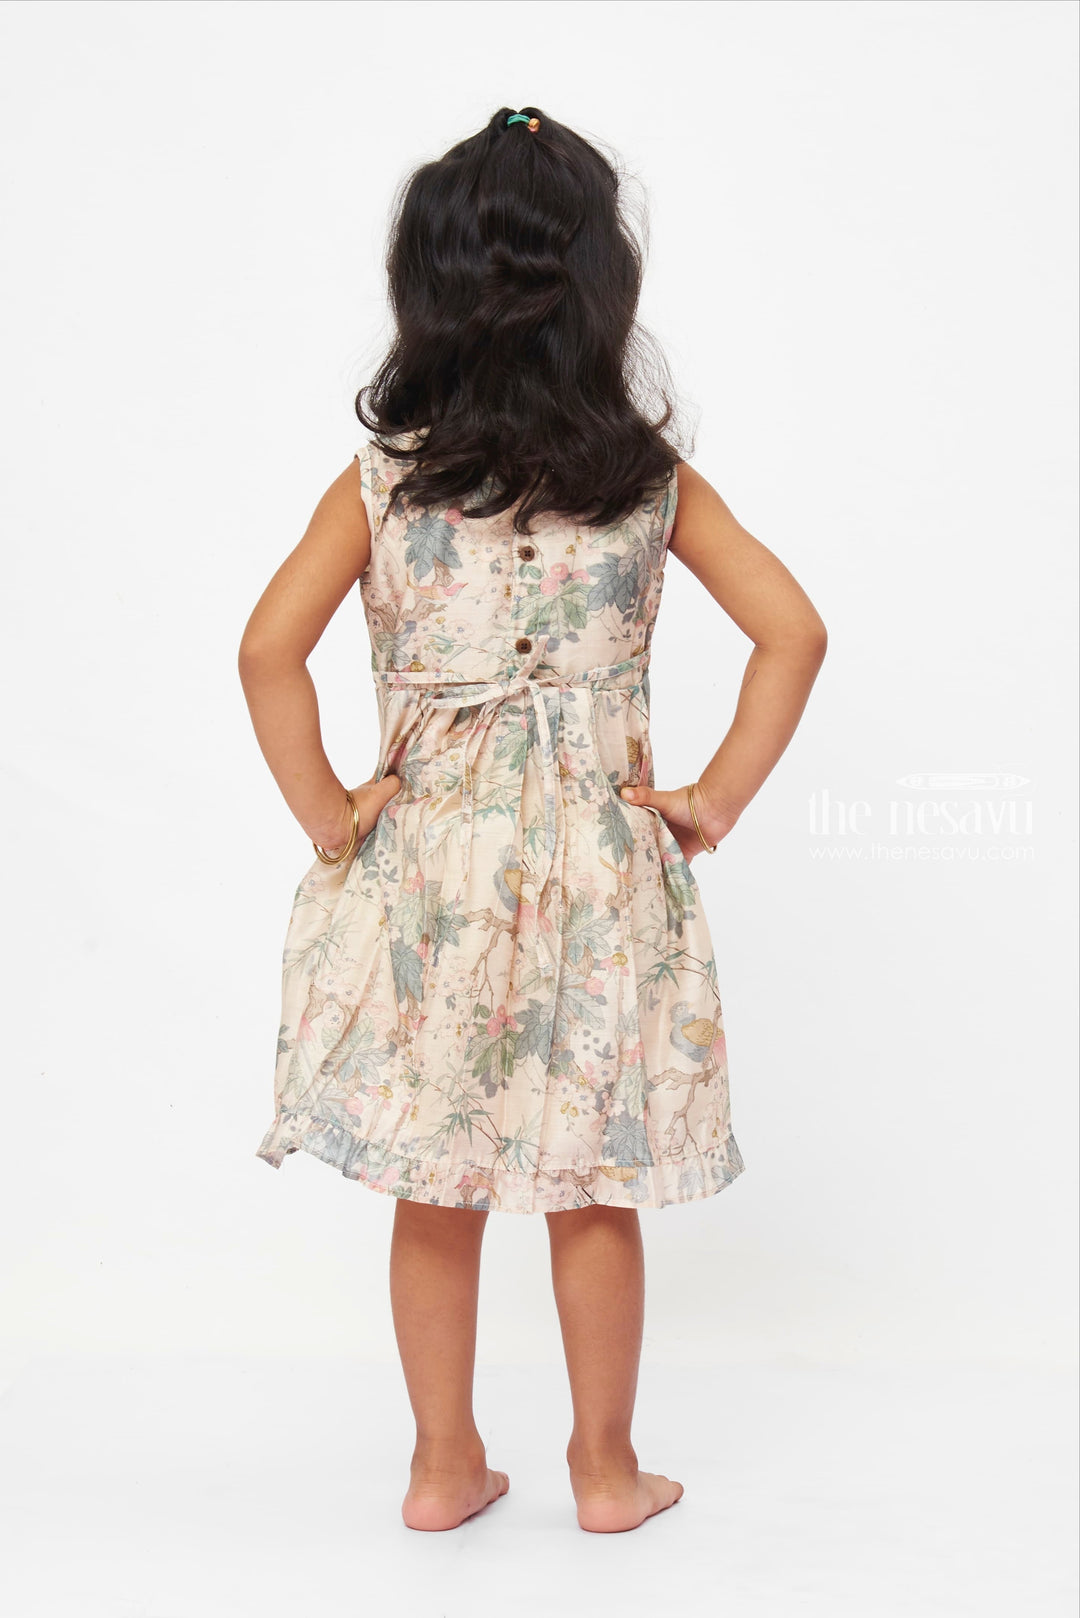 The Nesavu Girls Cotton Frock Enchanted Forest Frolic Dress: Whimsical Bird & Foliage Print Frock for Girls Nesavu Girls Storybook Bird Print Dress | Lace Trimmed Foliage Frock | Magical Everyday Wear | The Nesavu